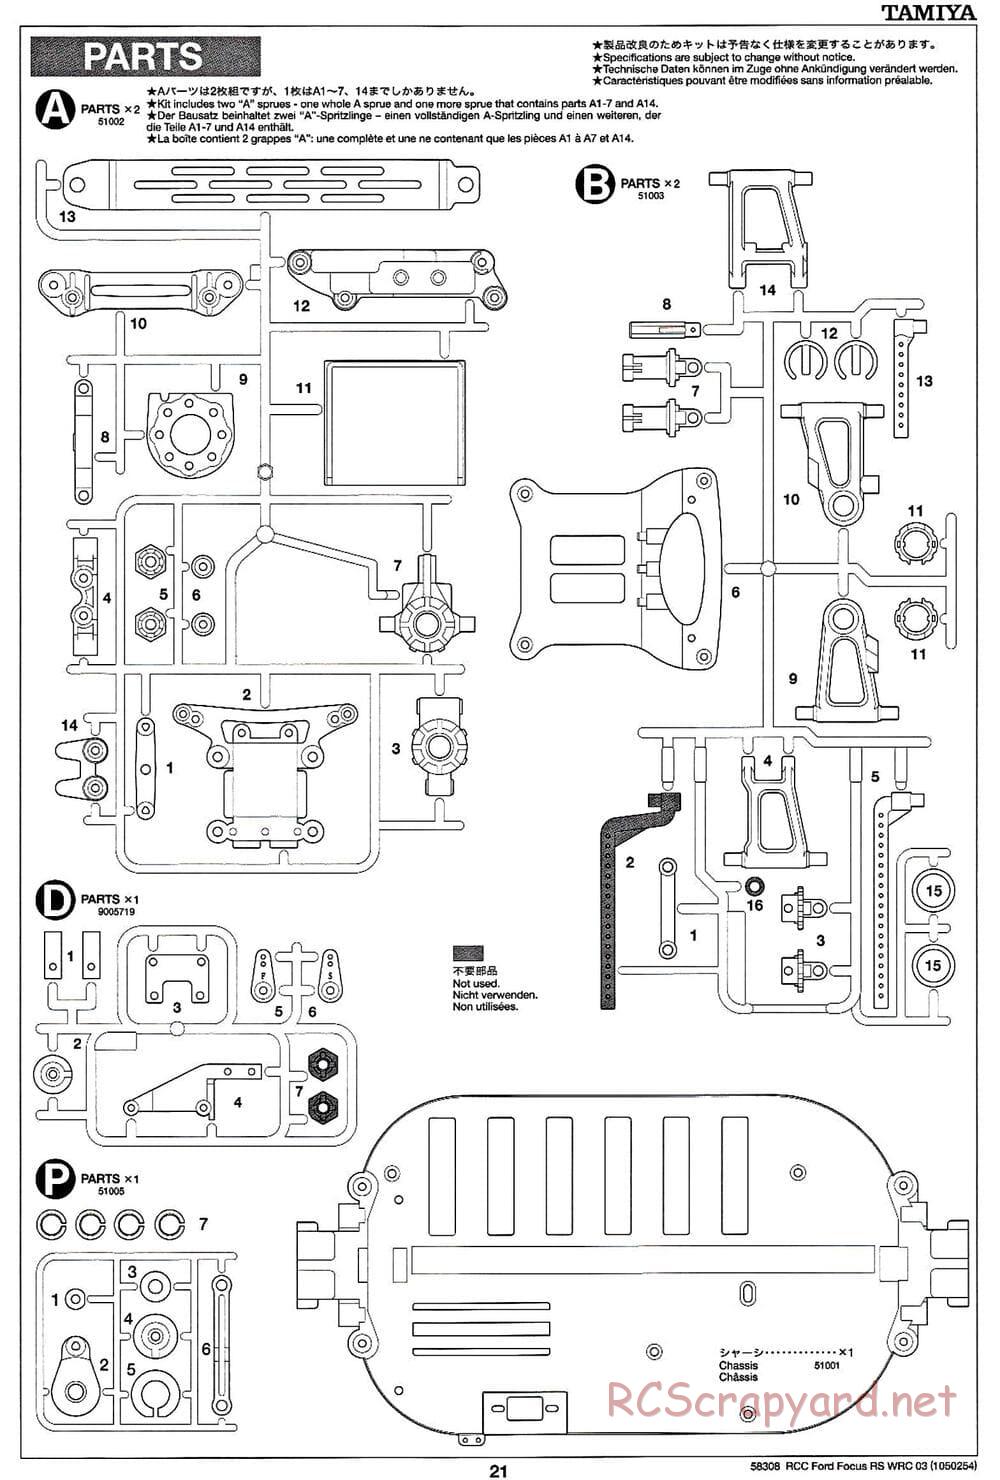 Tamiya - Ford Focus RS WRC 03 - TT-01 Chassis - Manual - Page 21